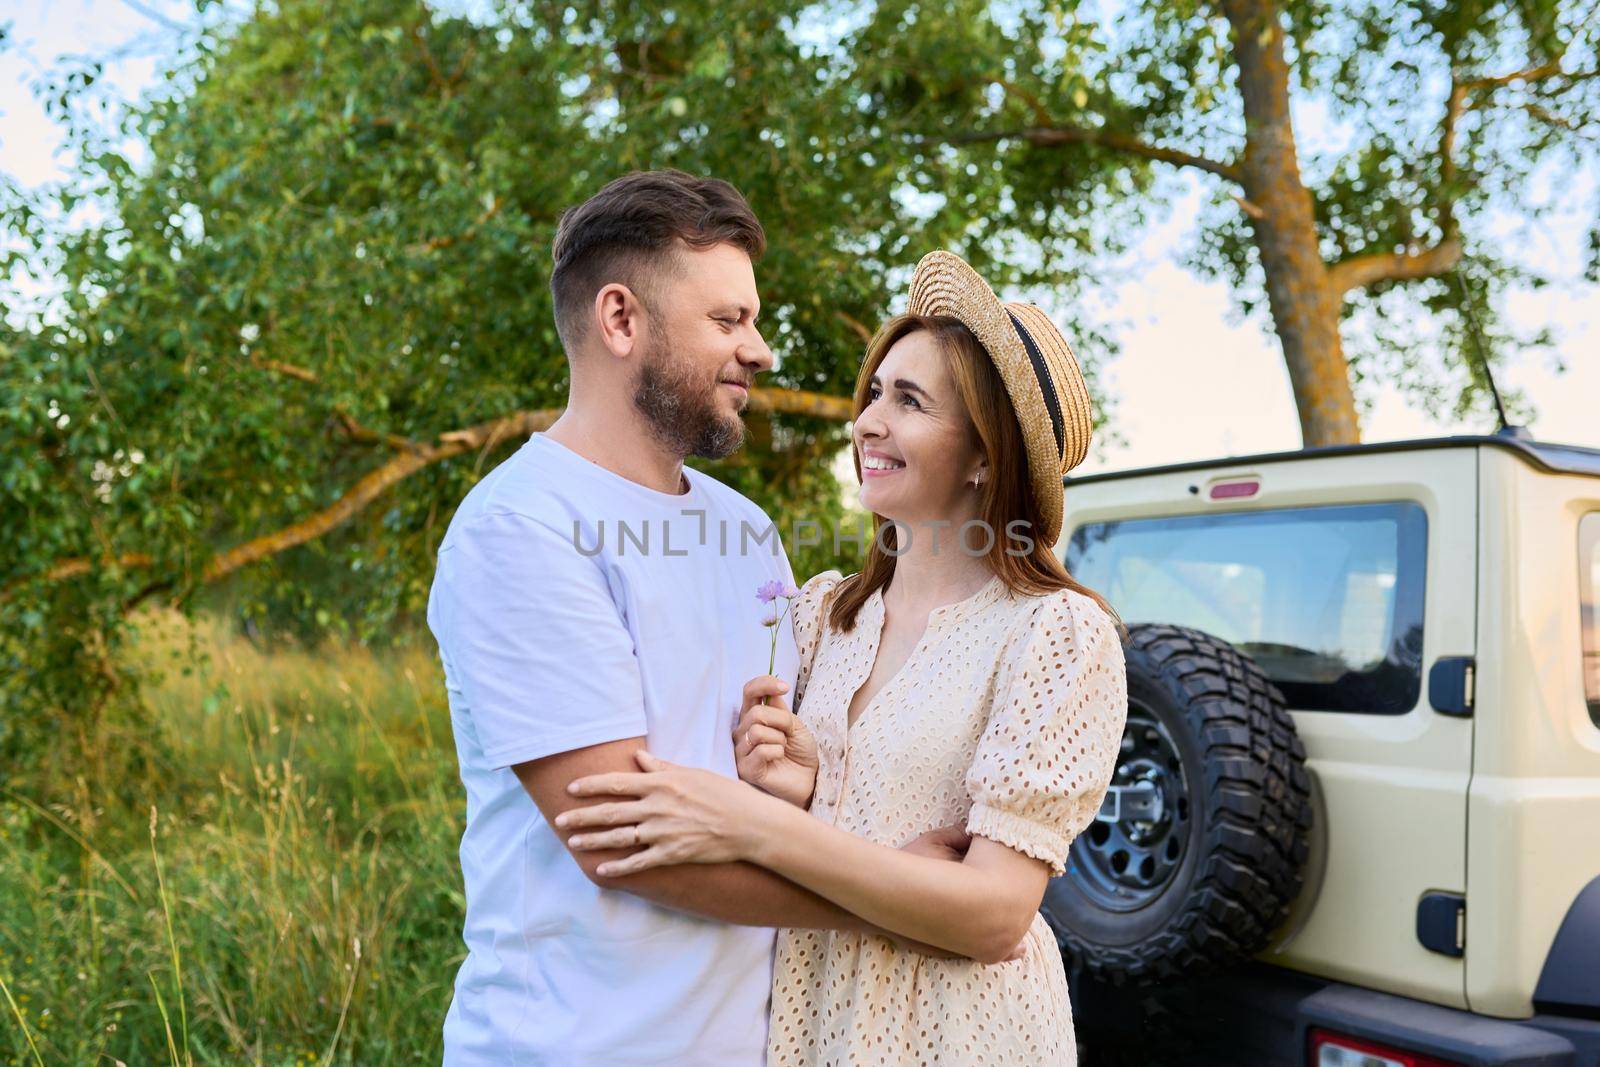 Love and romance of middle-aged couple. Happy hugging man and woman near car, summer nature wild meadow background. Relationship, holiday, date, trip, journey, weekend, family, people 40s concept